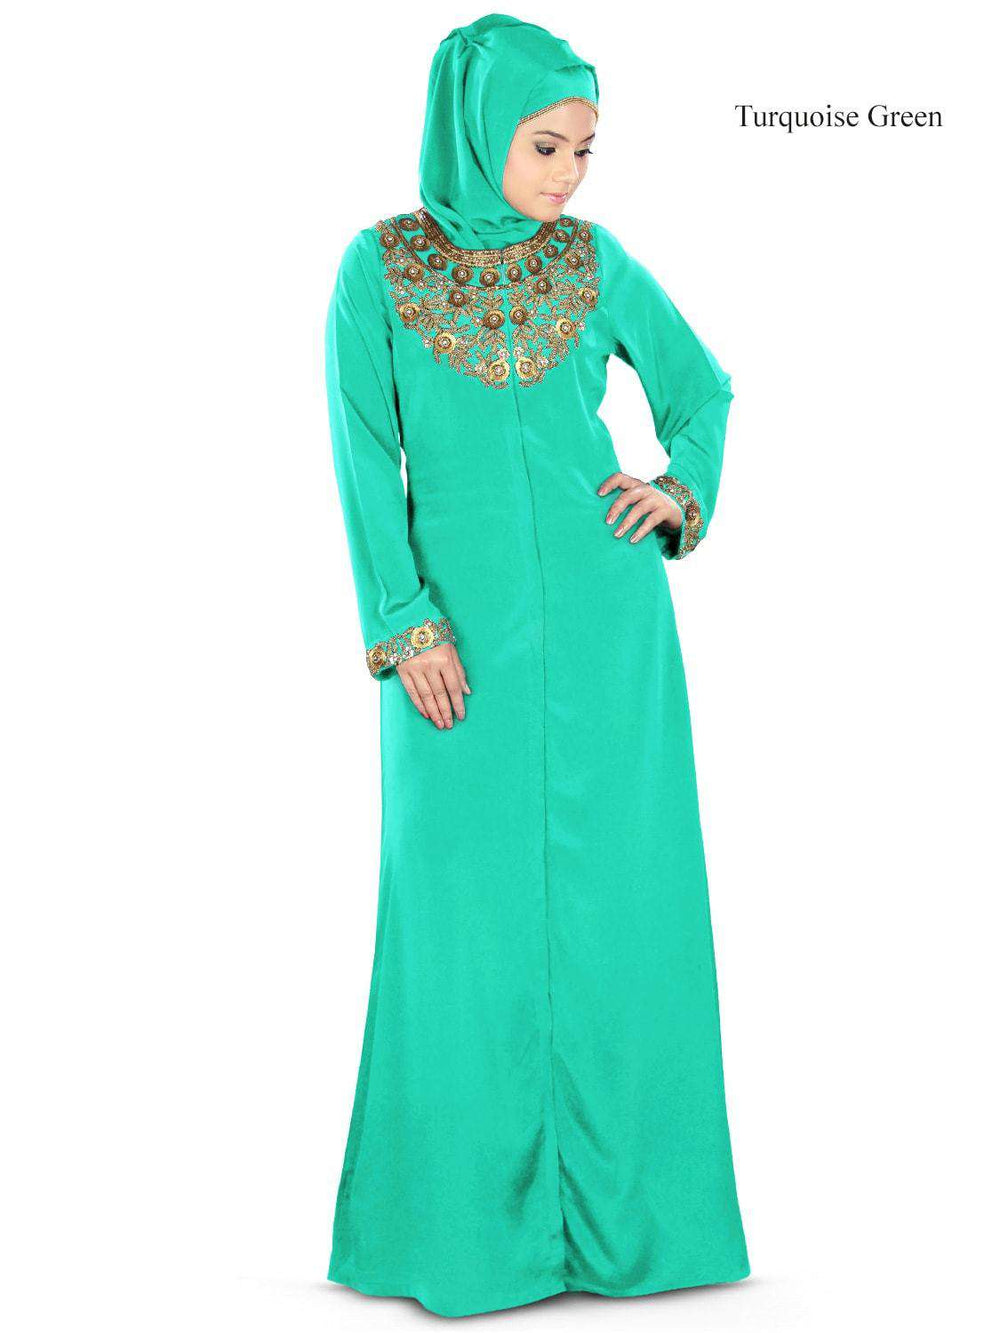 Fiddah Gold Hand Embroidered Burqa Turquoise Green